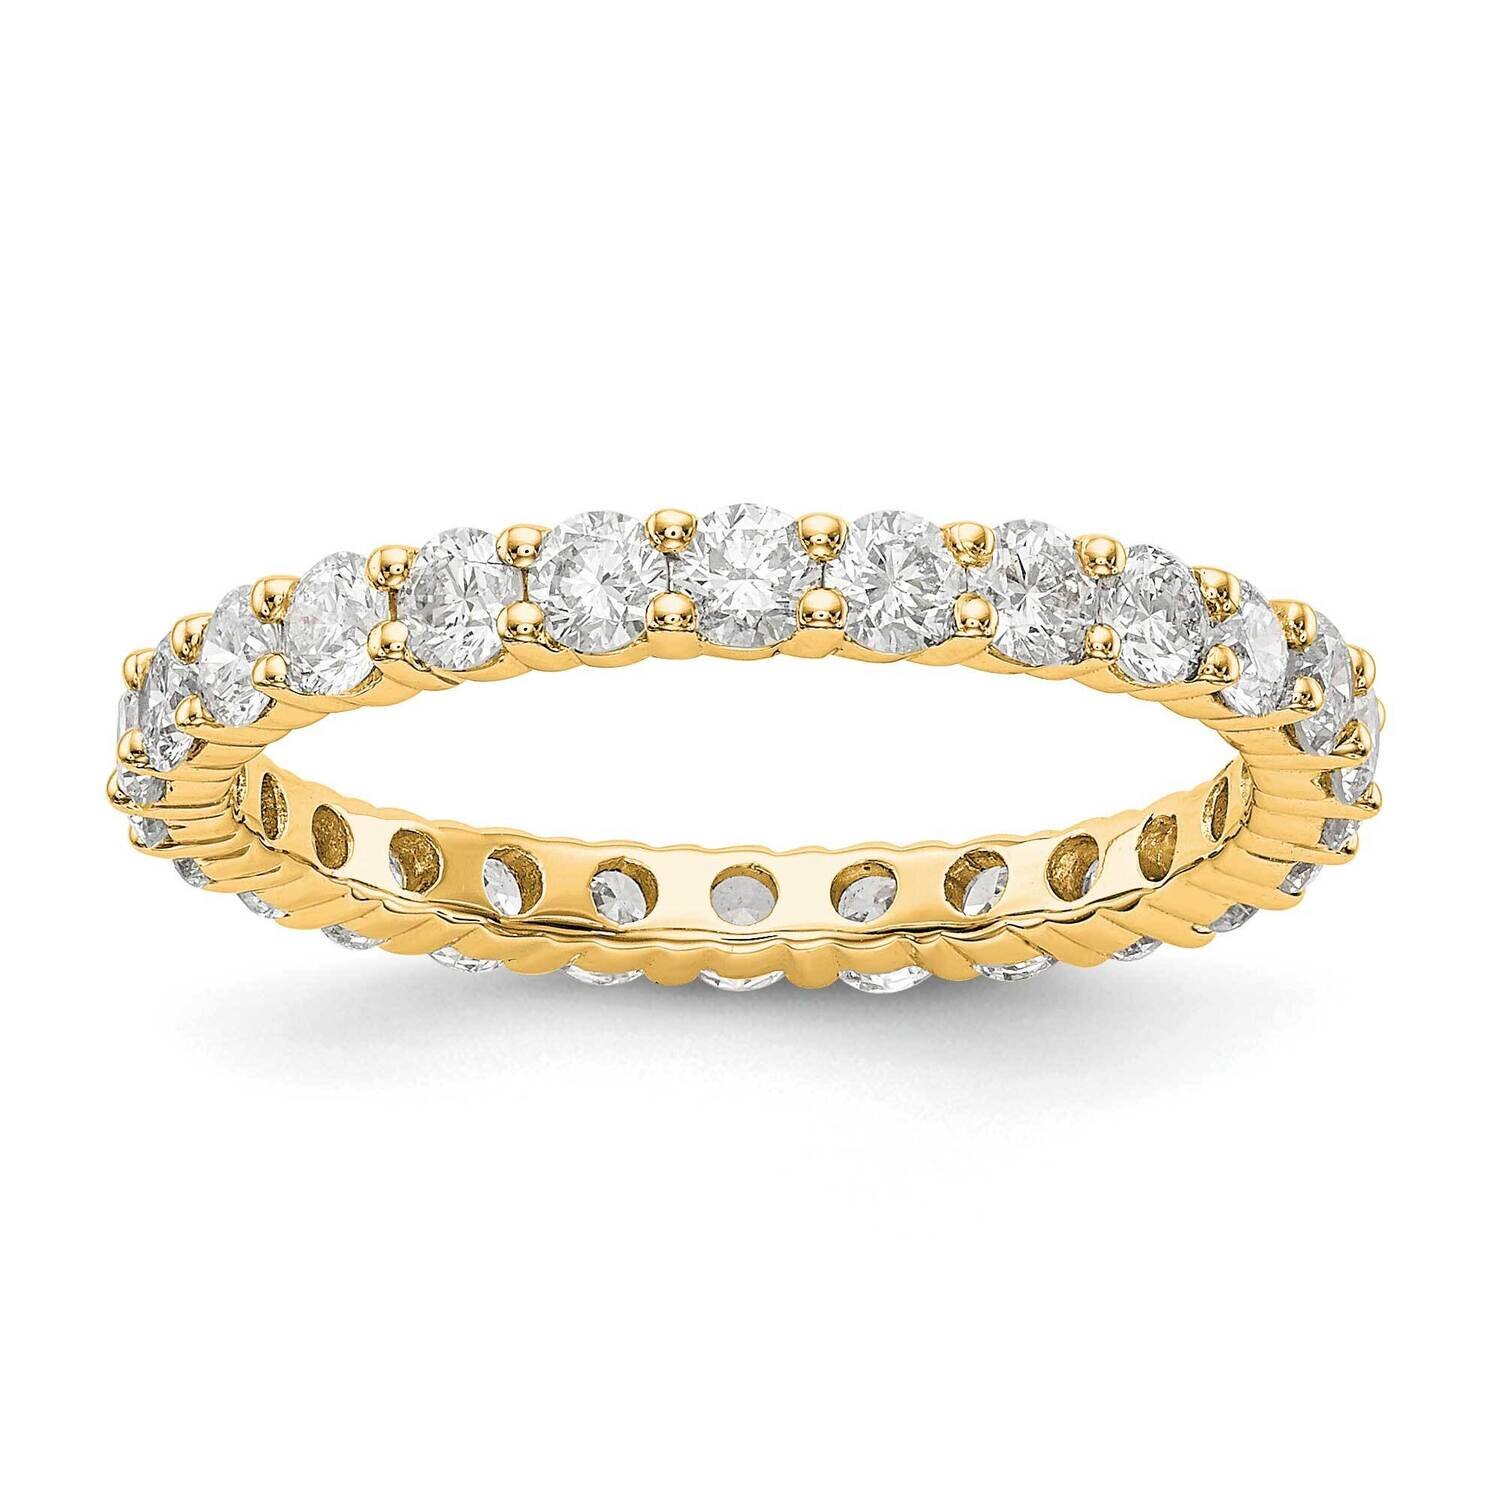 1.5CT Shared Prong Diamond Eternity Band 14k Gold ET0001-150-7Y4